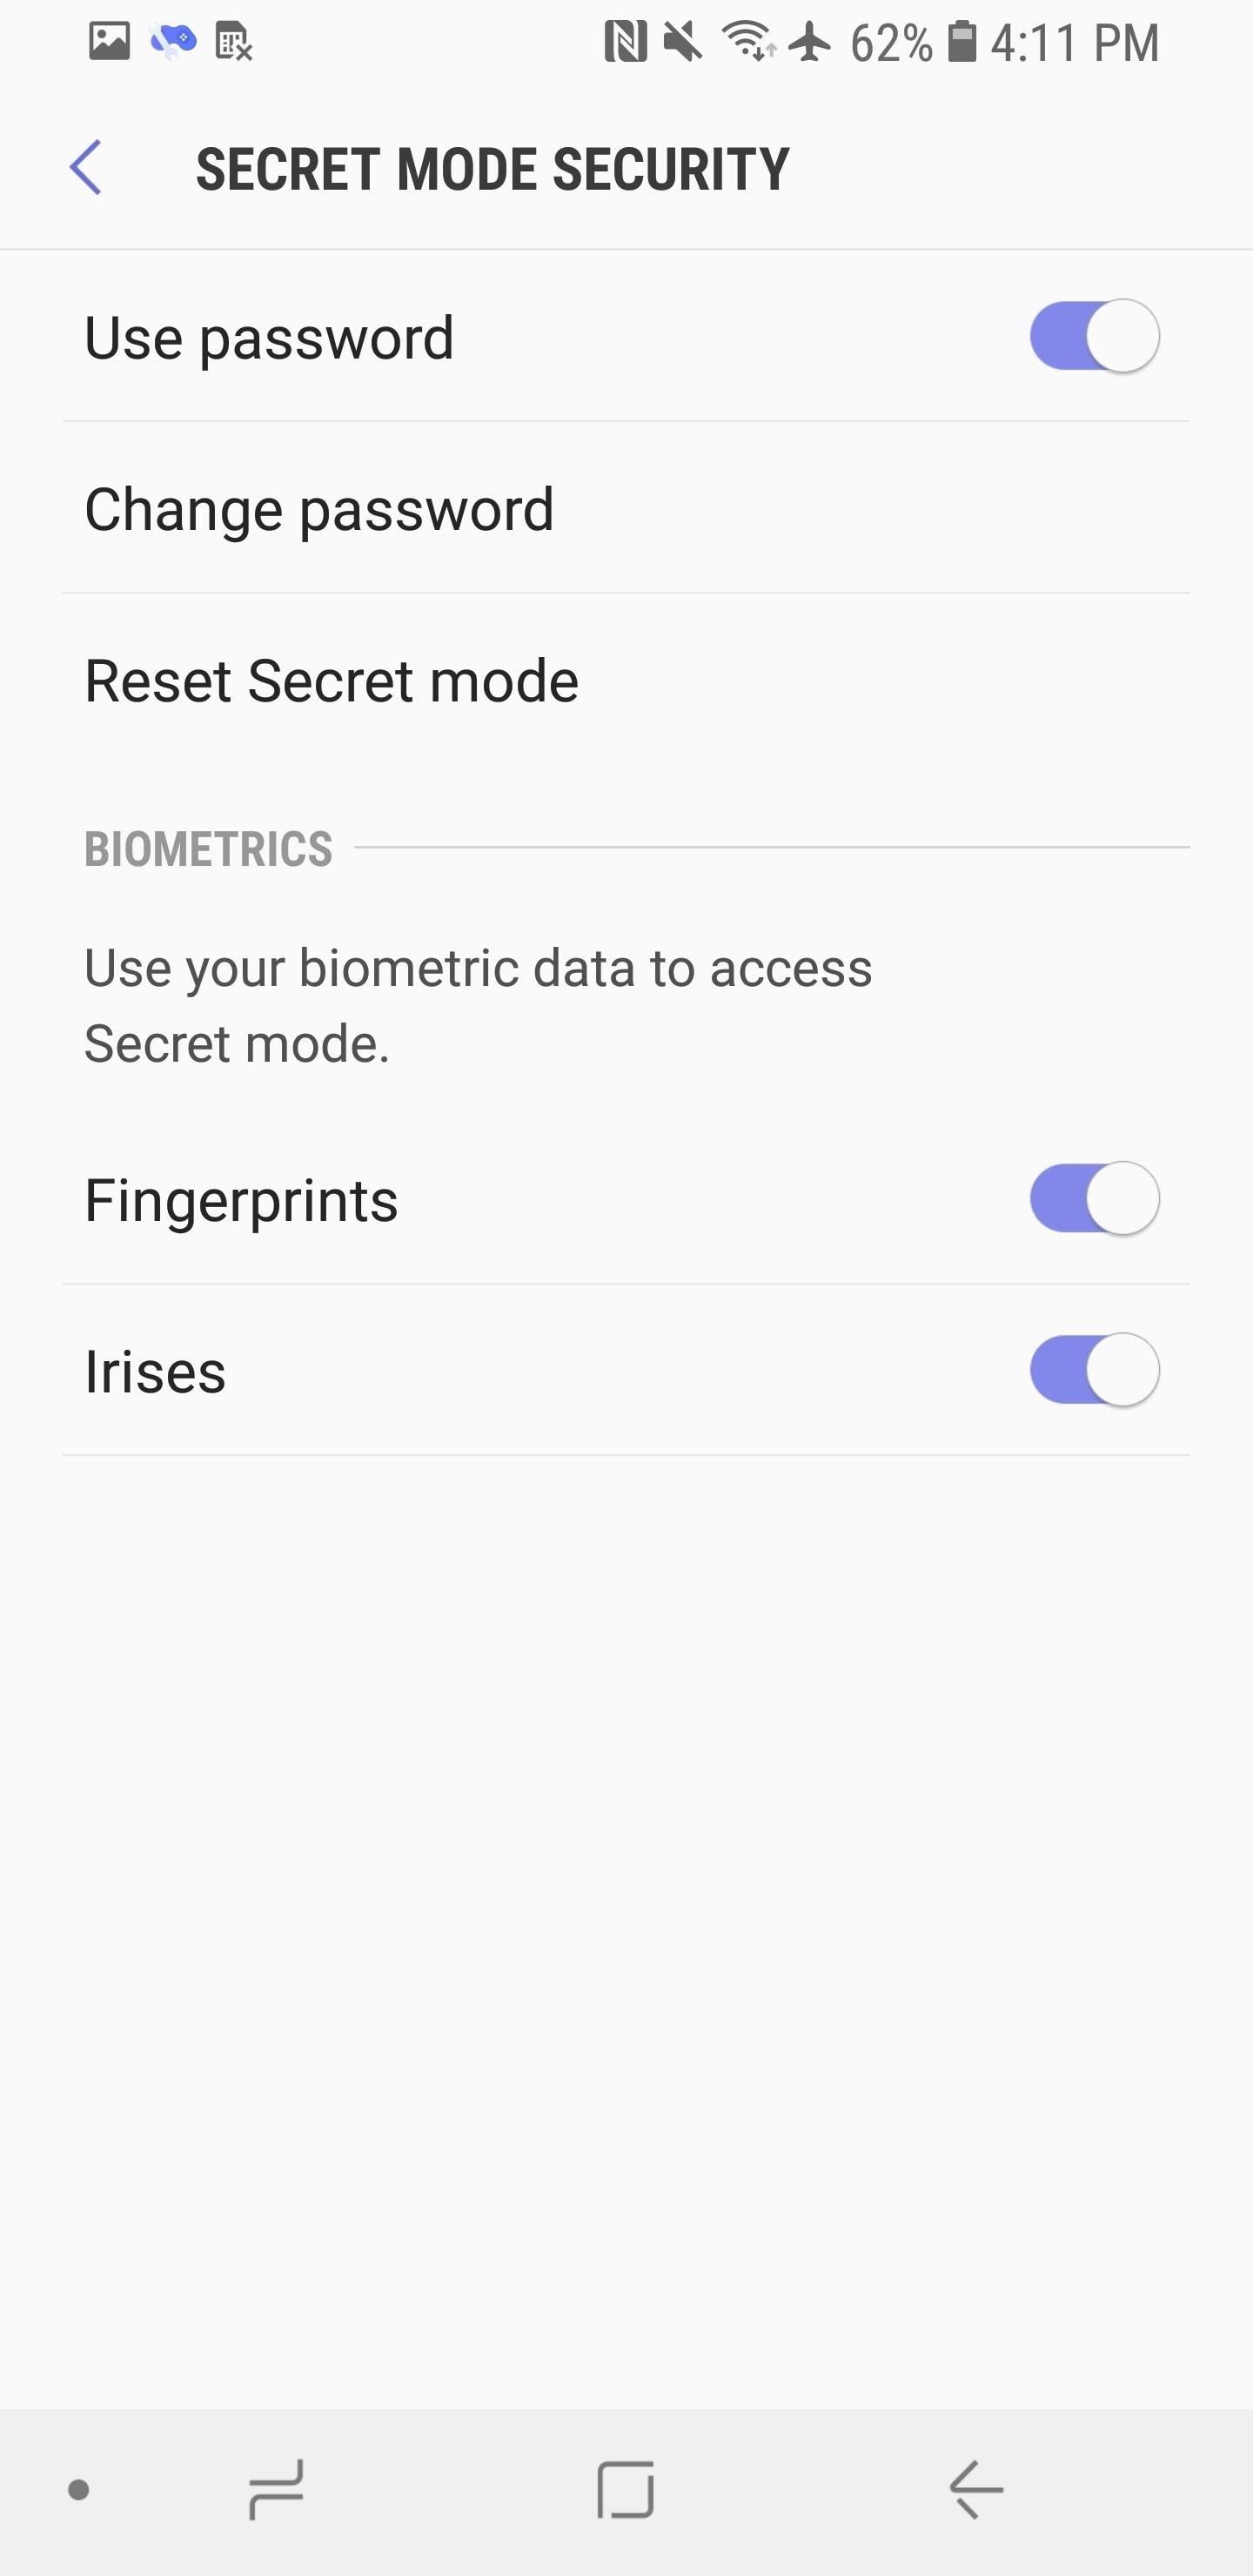 Samsung Internet 101: How to Password-Protect Your Private Browsing Sessions